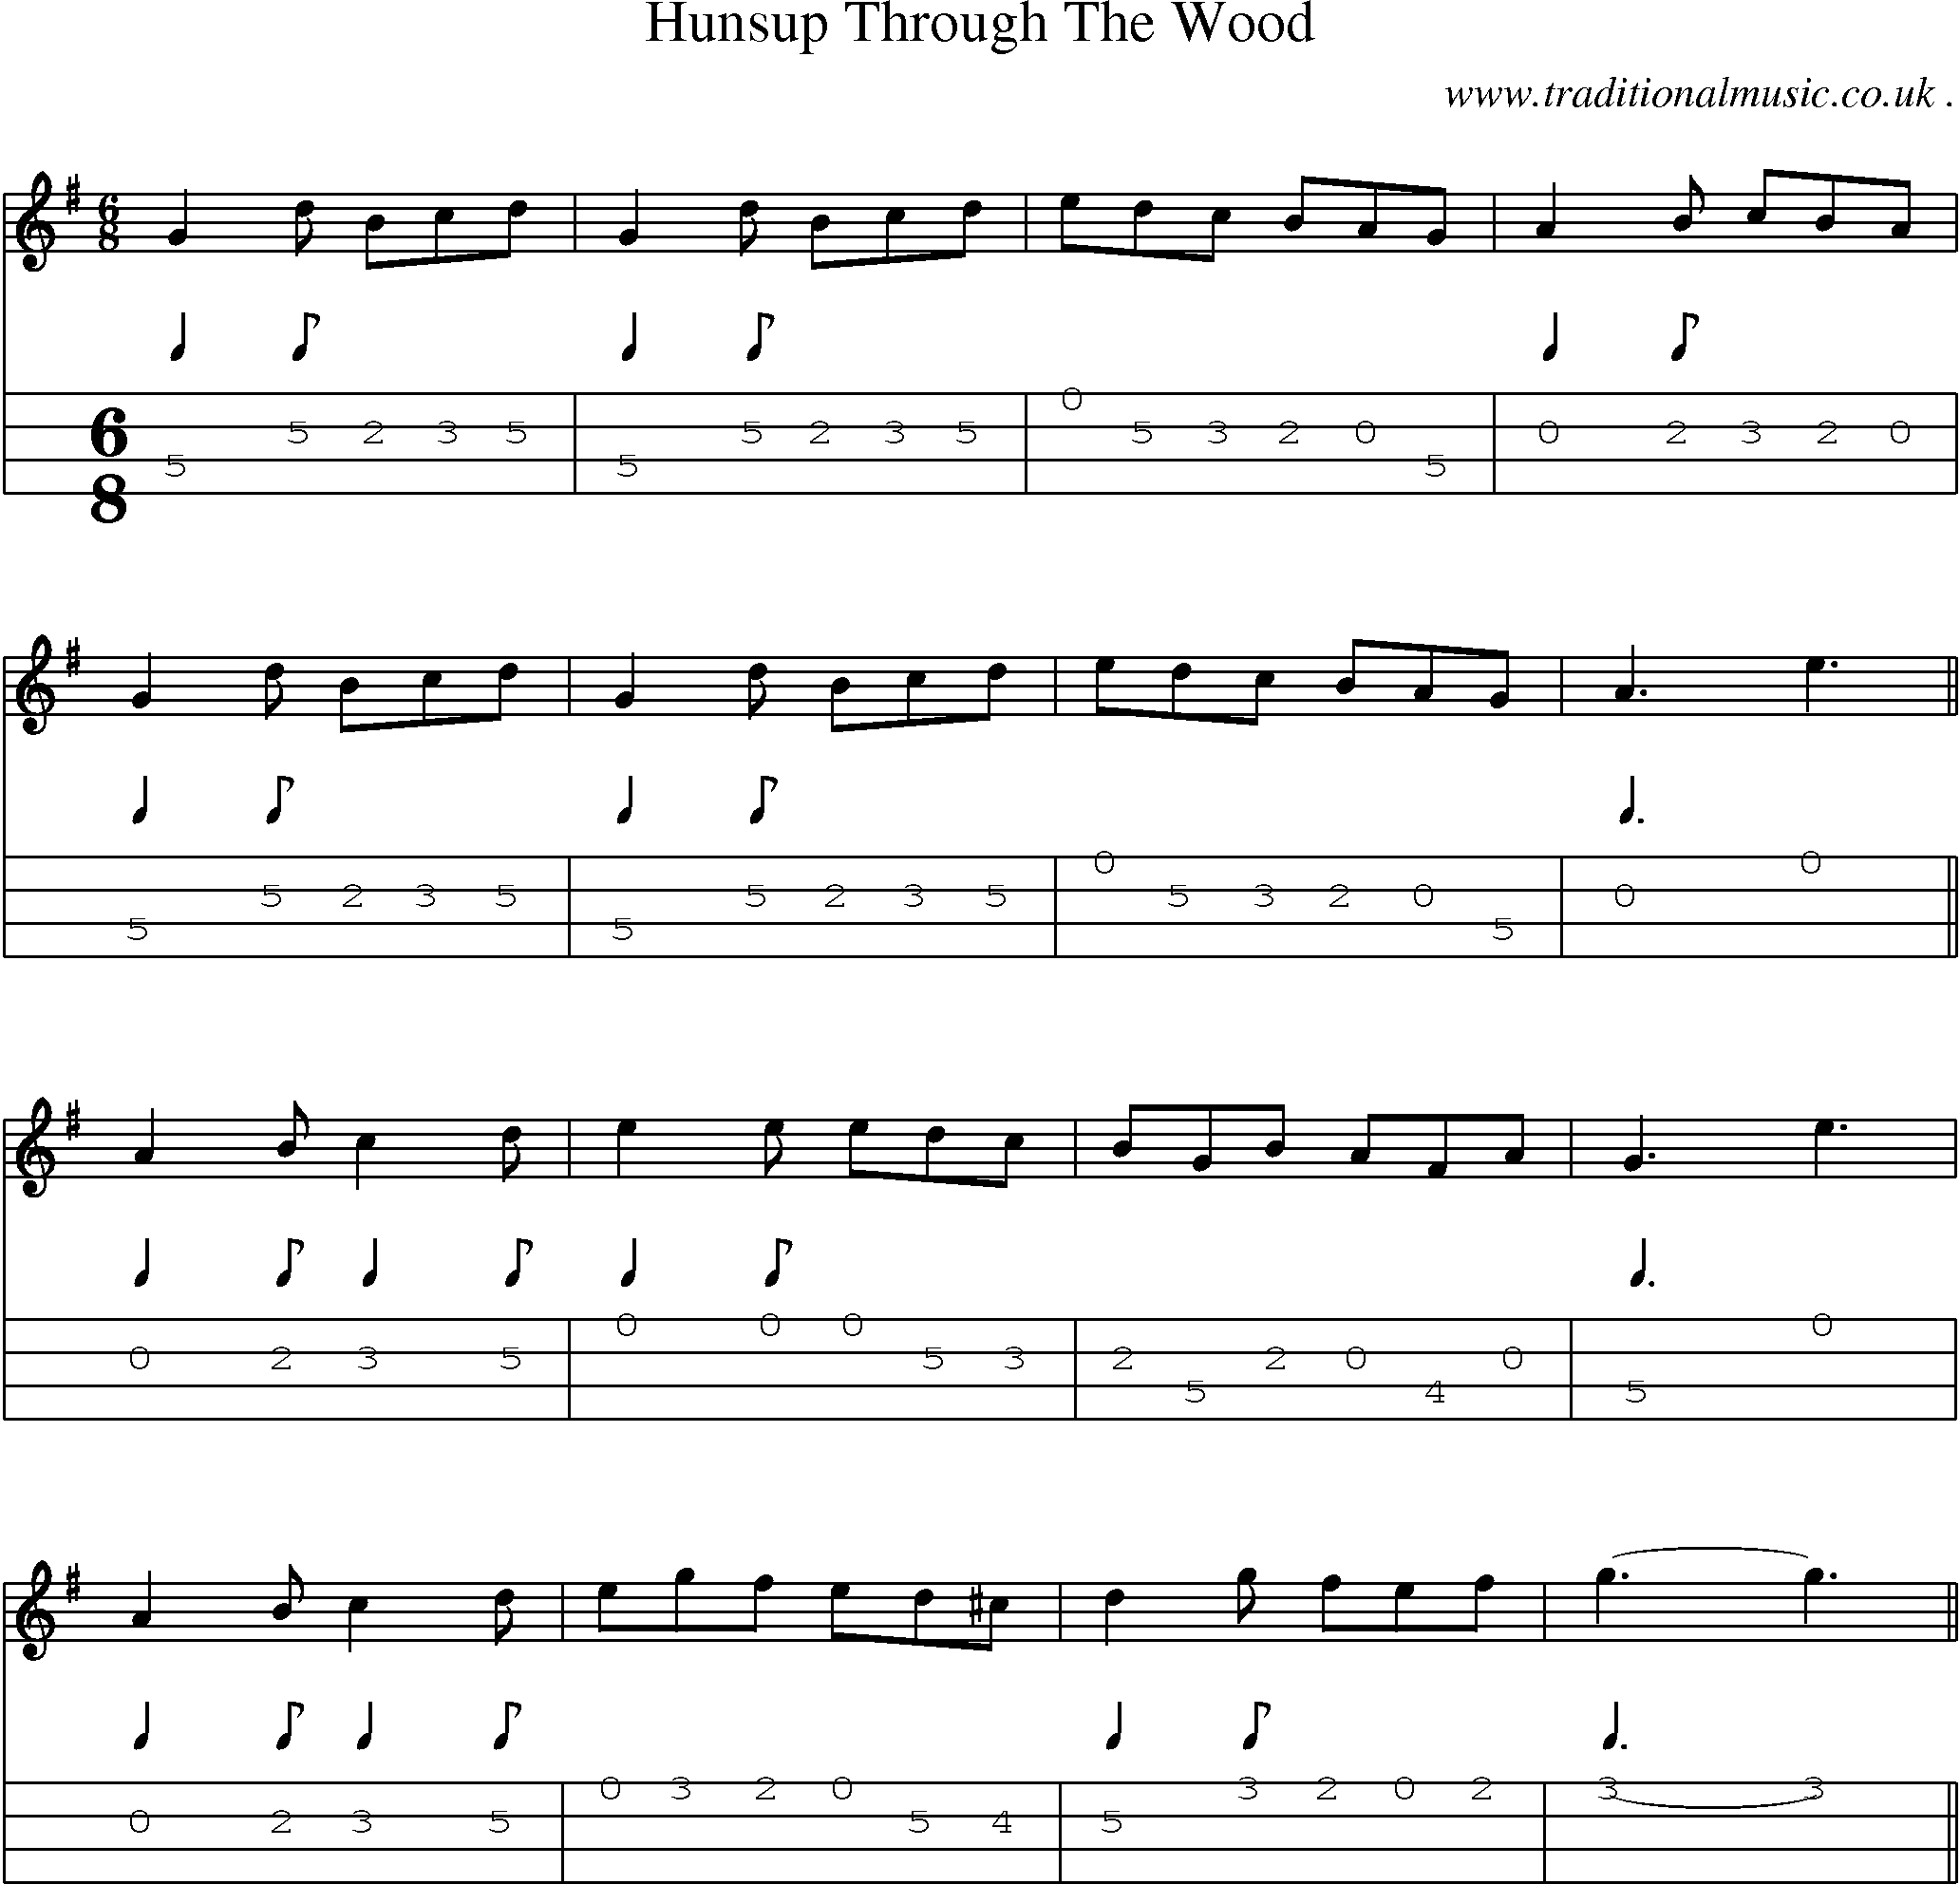 Sheet-Music and Mandolin Tabs for Hunsup Through The Wood